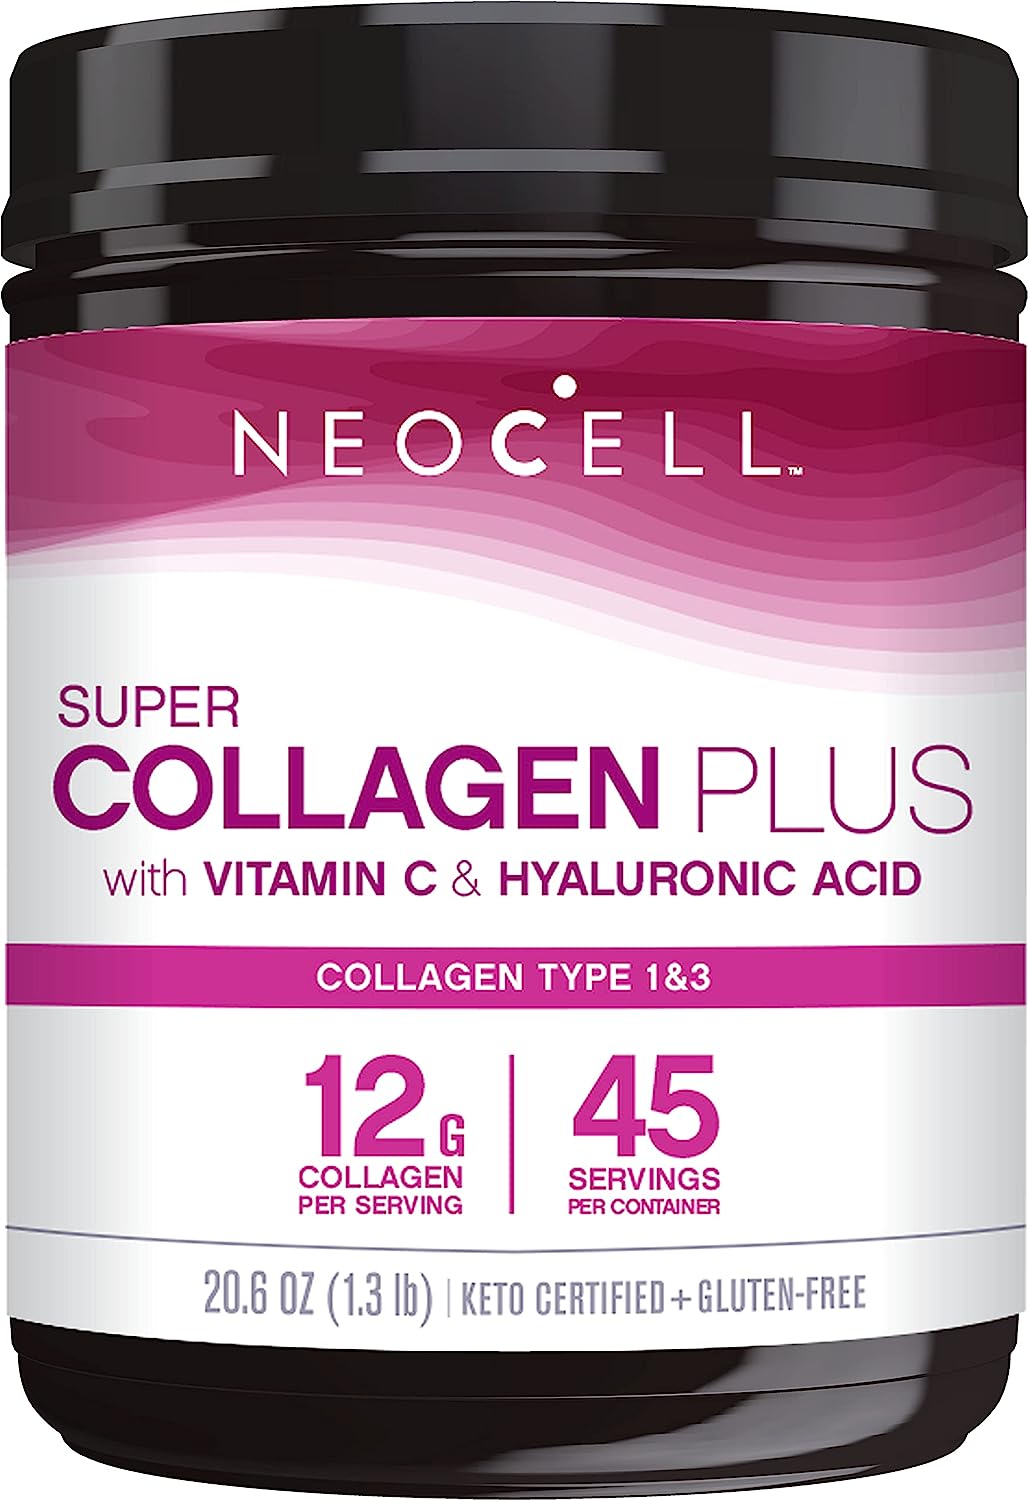 NeoCell Super Collagen Powder, Collagen Plus includes Vitamin C & Hyaluronic Acid, Promotes Healthy Hair, Beautiful Skin, & Nail Support, Collagen Type 1 & 3, 12g Collagen per Serving, 20.